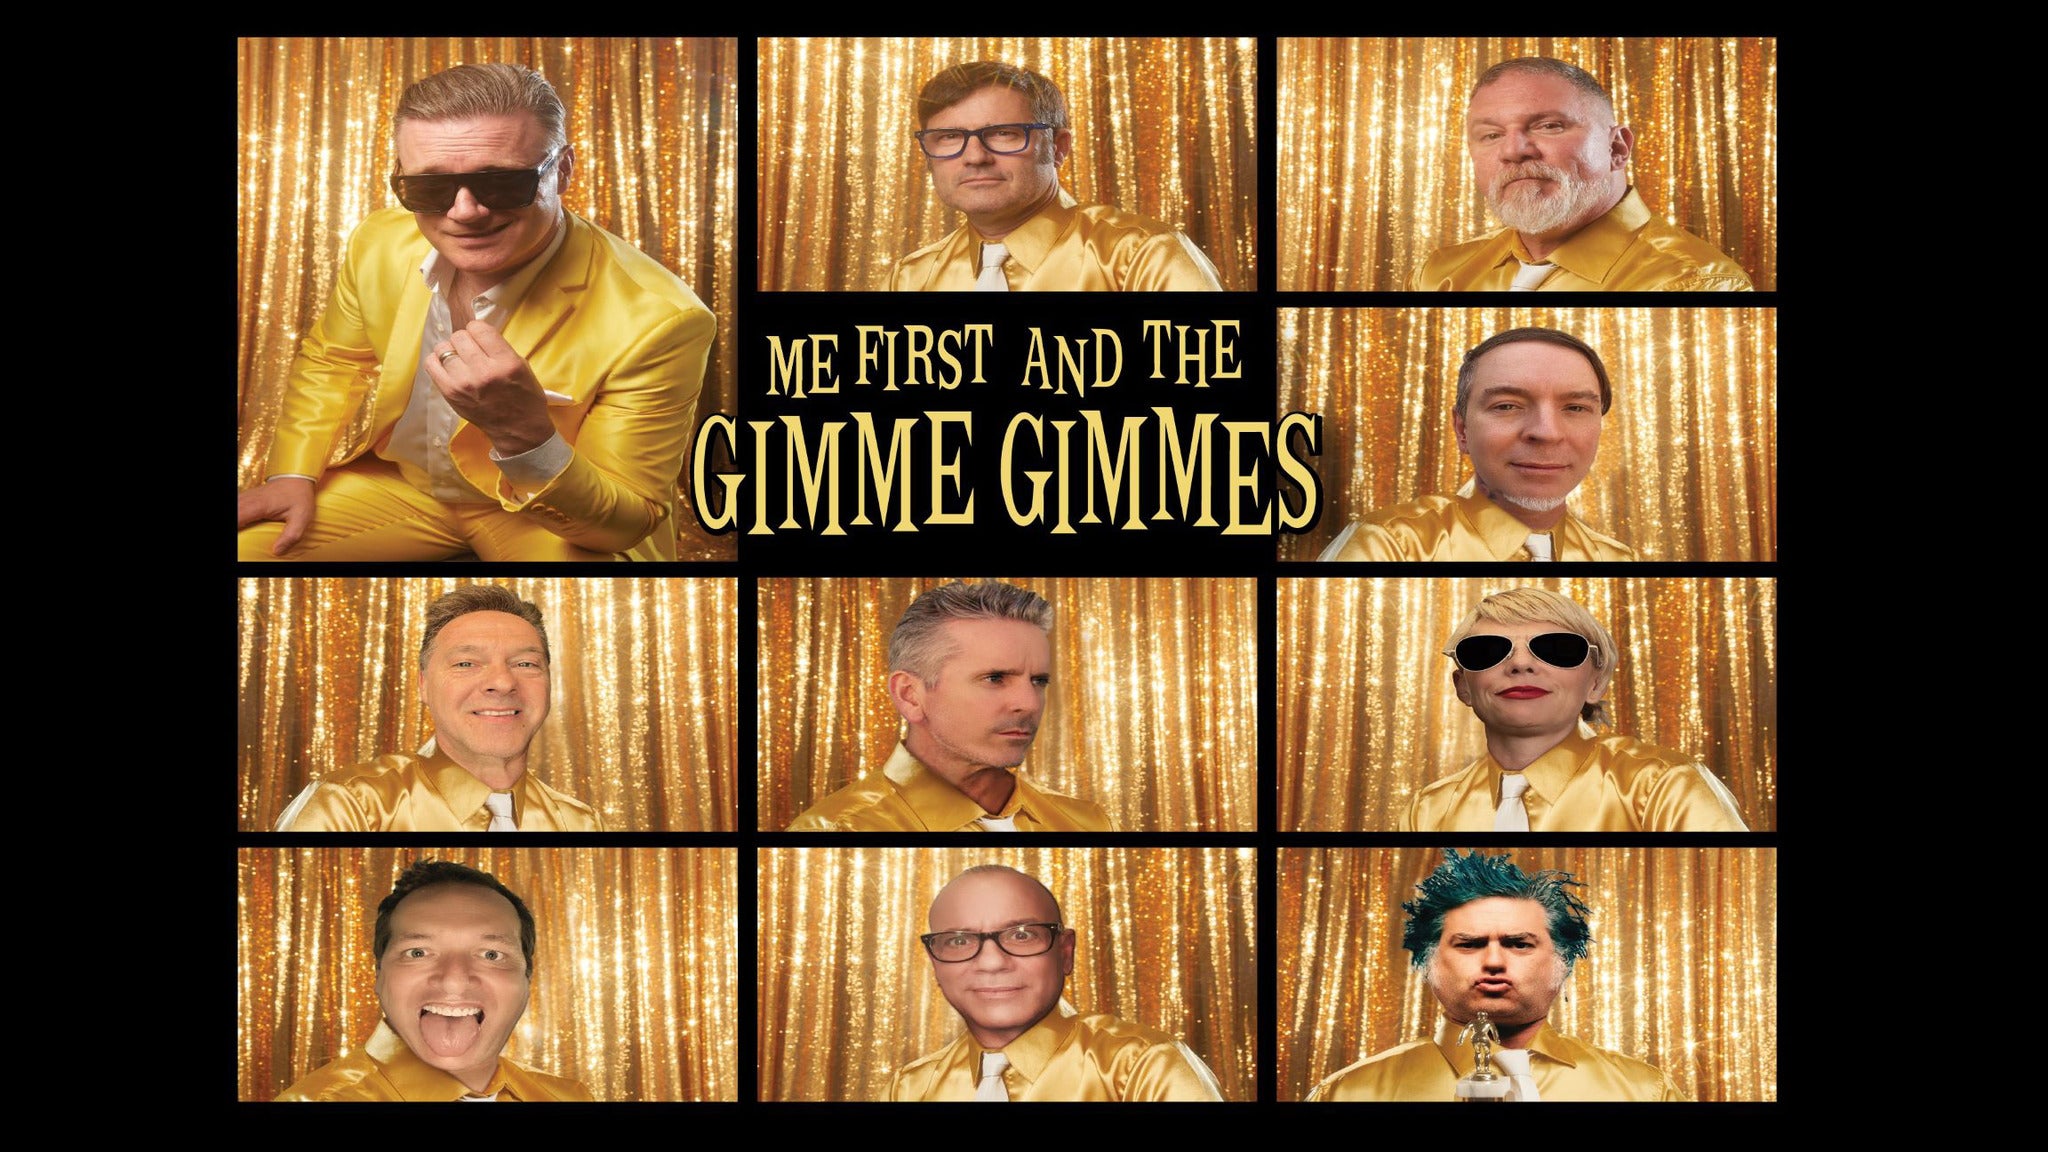 Me First and the Gimme Gimmes at Delmar Hall